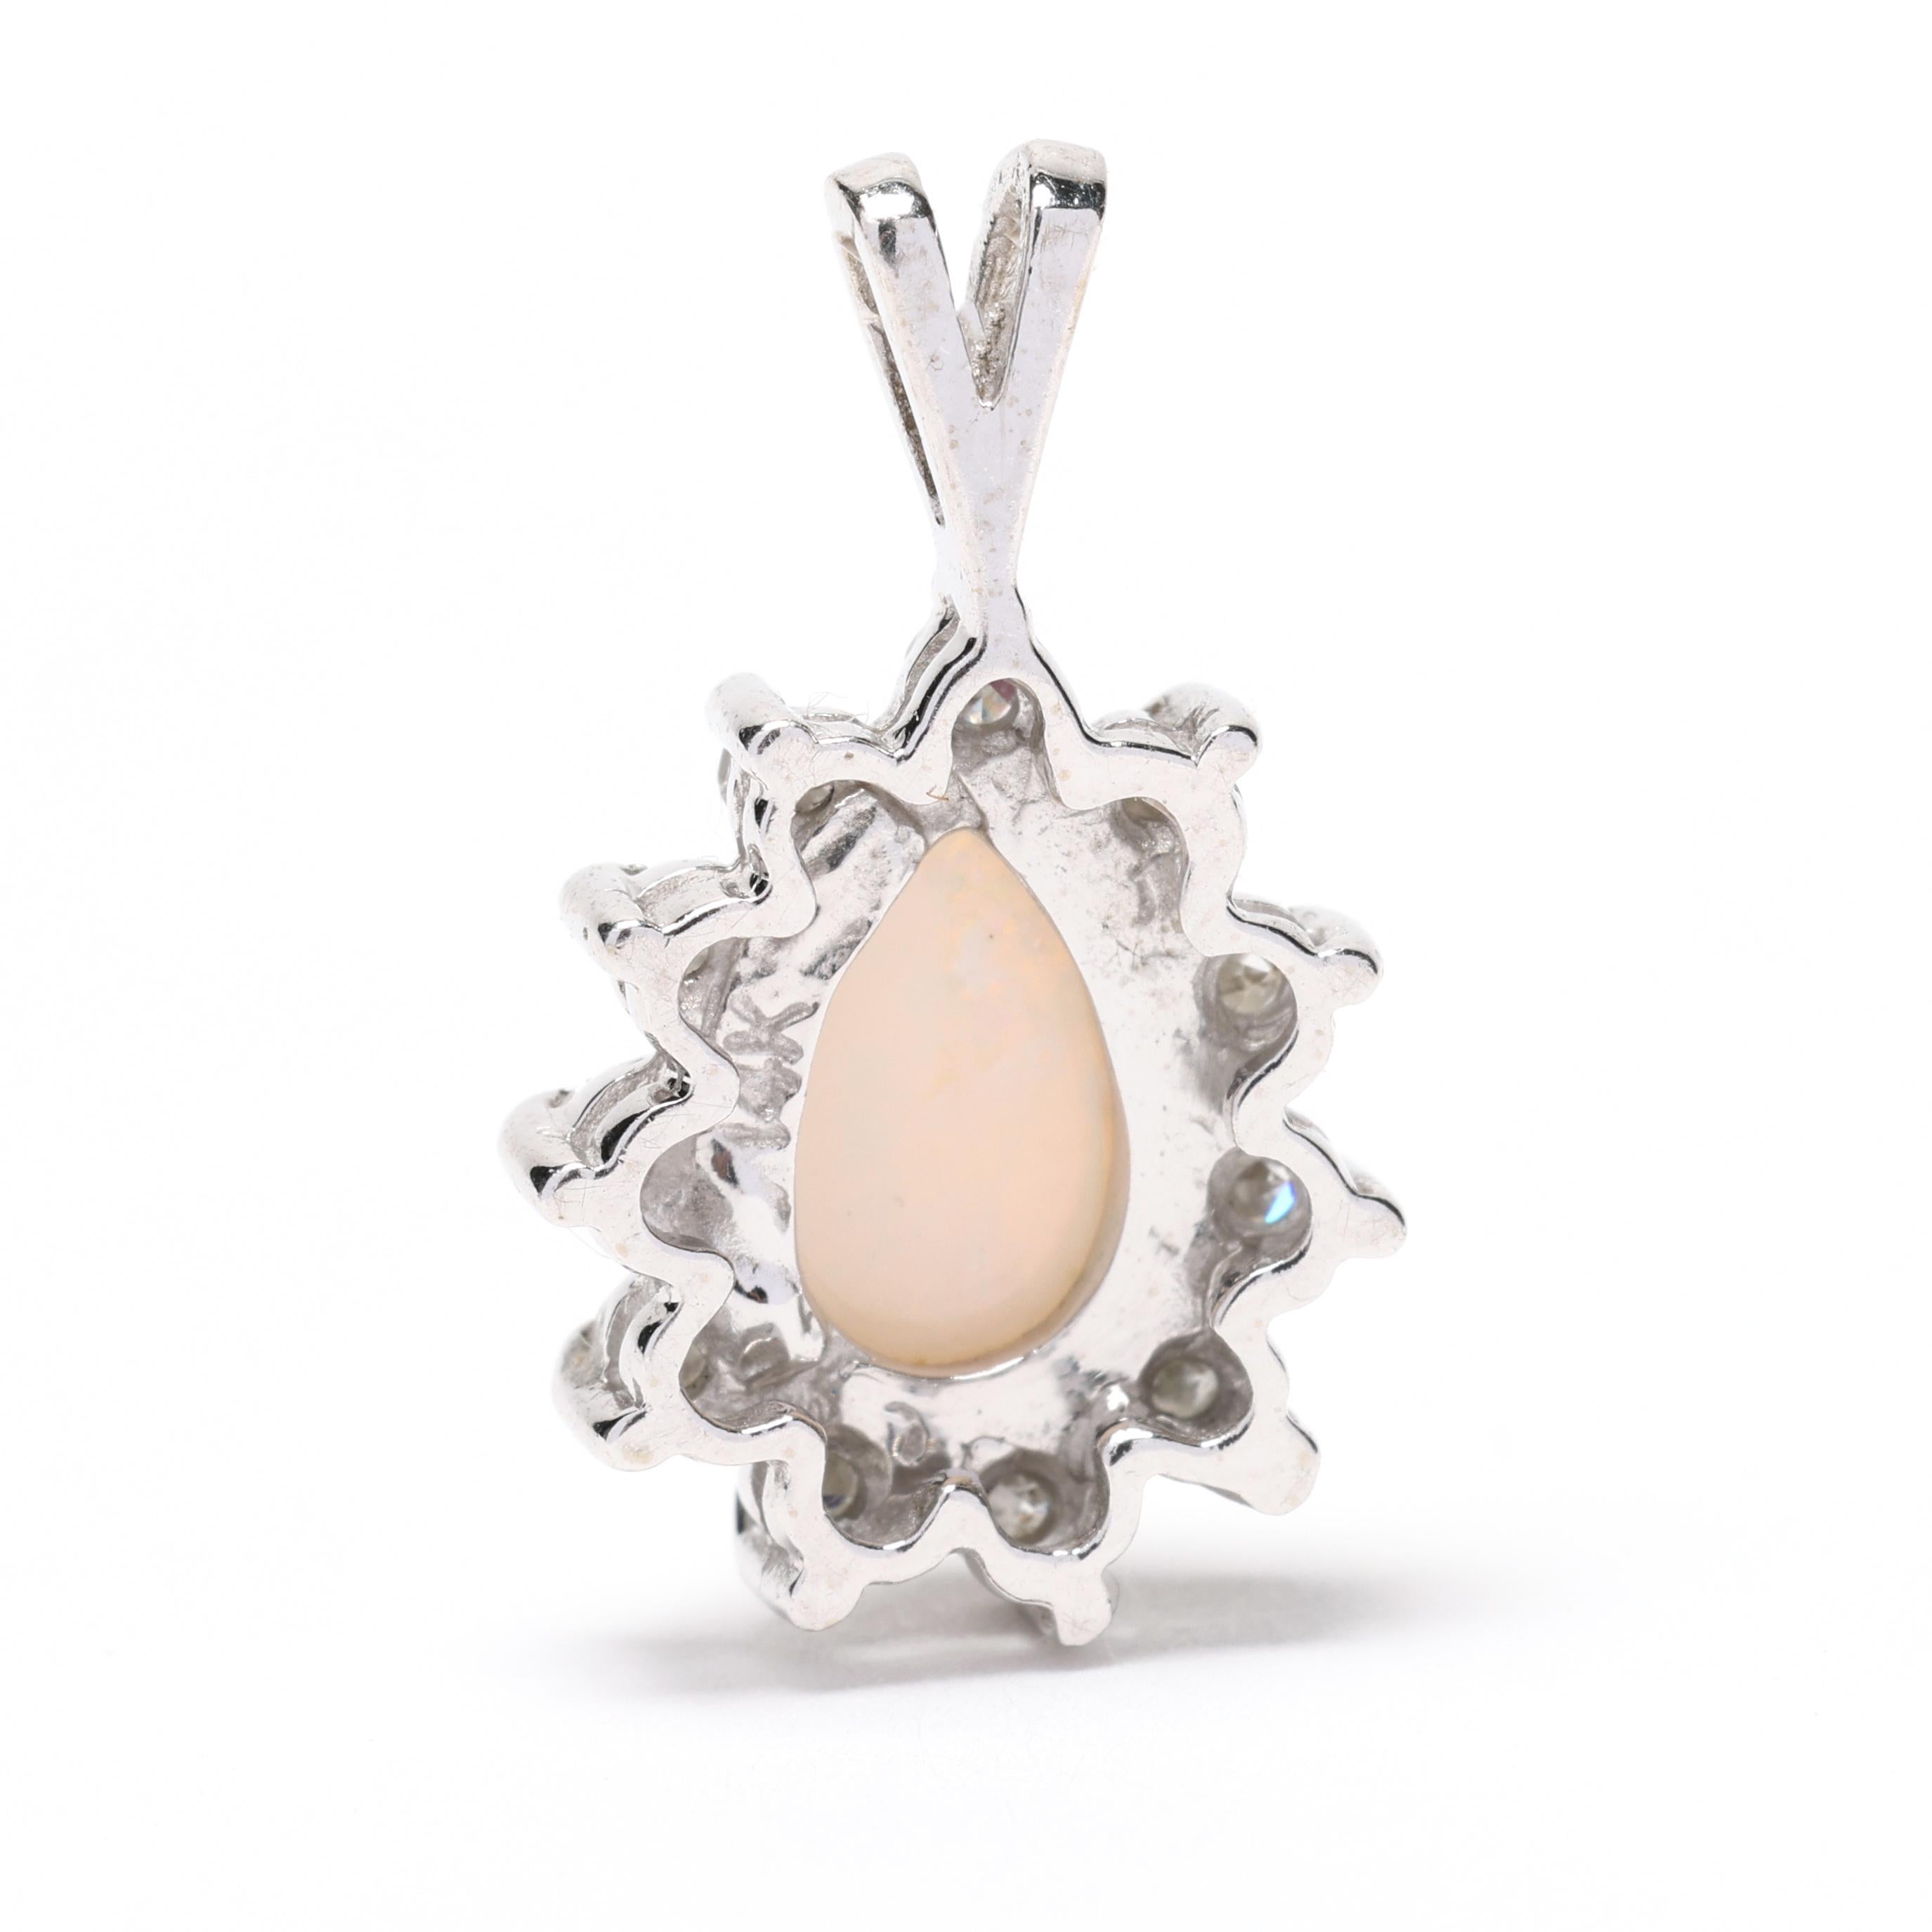 Elevate your jewelry collection with this exquisite 0.15ctw Diamond and Opal Cluster Charm. Set in lustrous 14k white gold, this pear-shaped floral pendant boasts a mesmerizing blend of shimmering diamonds and iridescent opals.



Stones:

- opal, 1